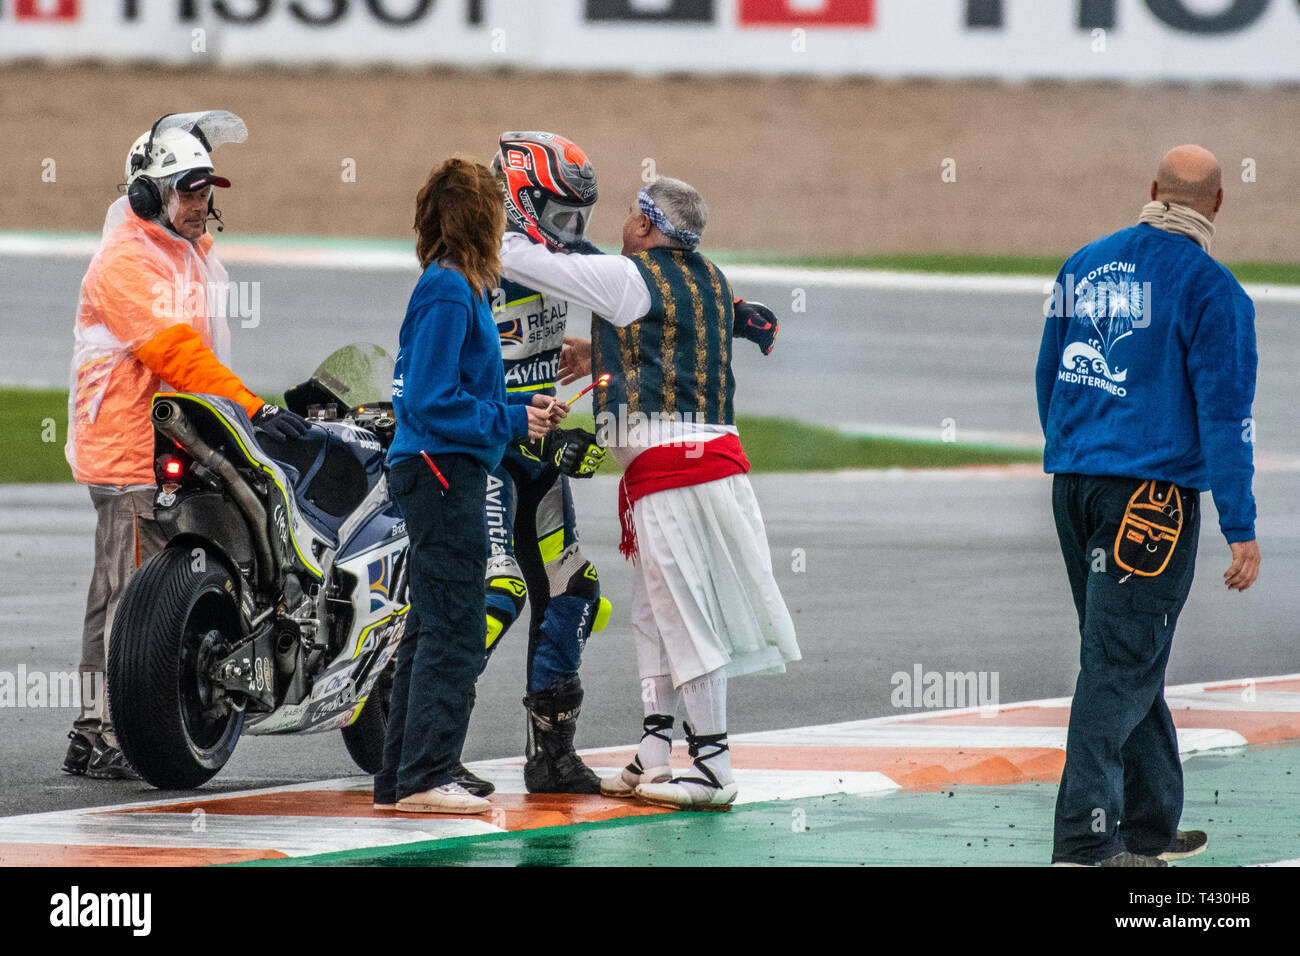 Valencia/Spain - 11/18/2018 - #81 Jordi Torres (SPA, Avintia Ducati)  lighting the fireworks after his final race in MotoGP at the 2018 Valencia  GP Stock Photo - Alamy